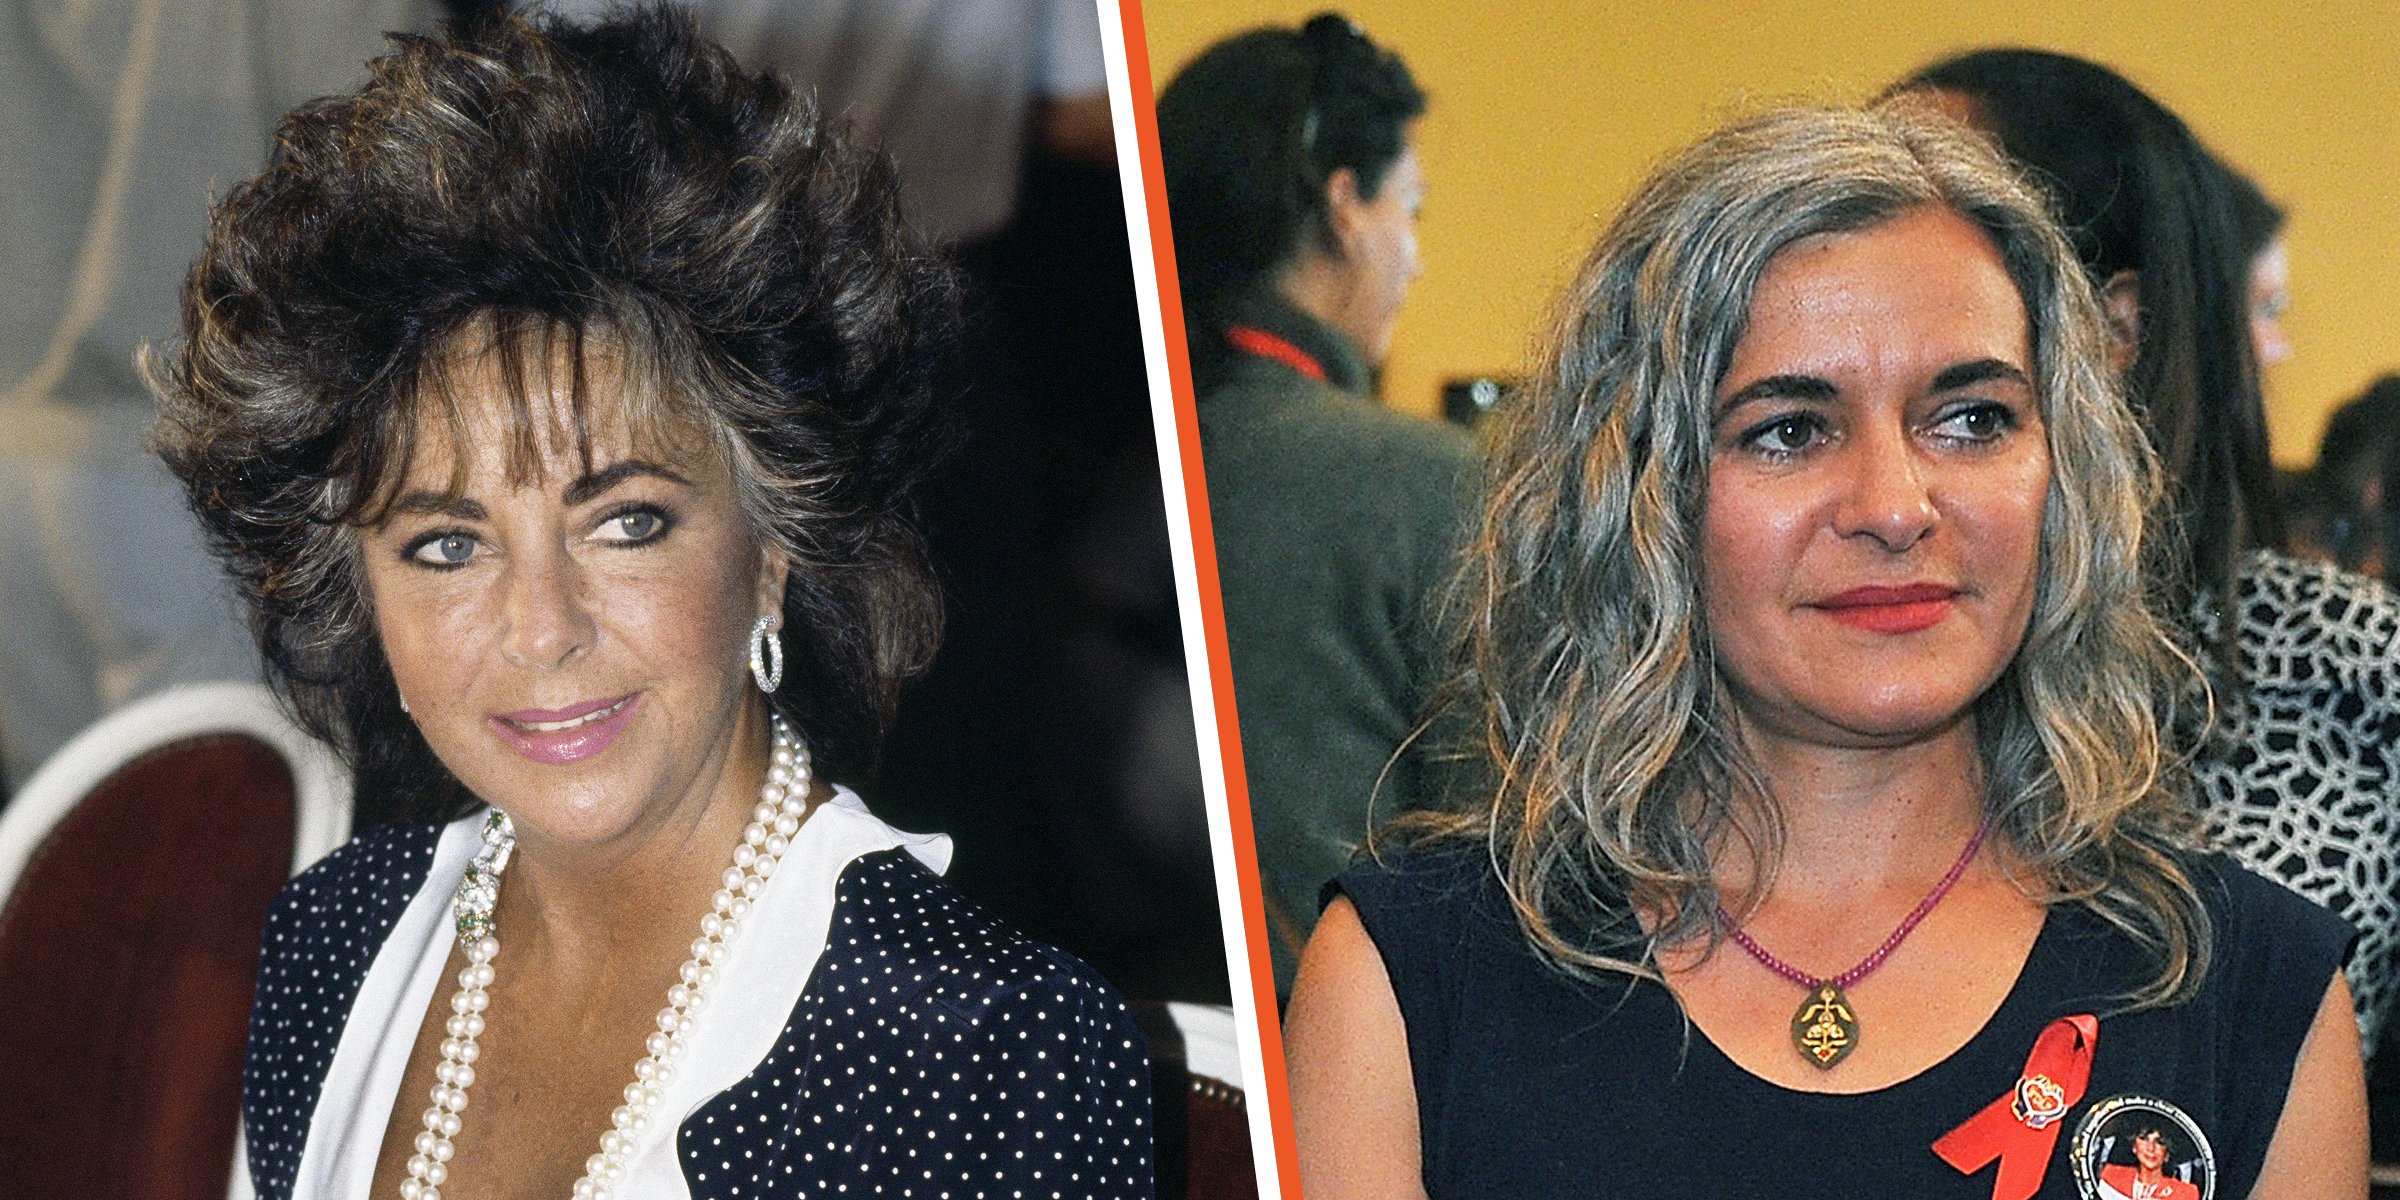 Elizabeth Taylor, 1985, and Laela Wilding, 2015 | Source: Getty Images